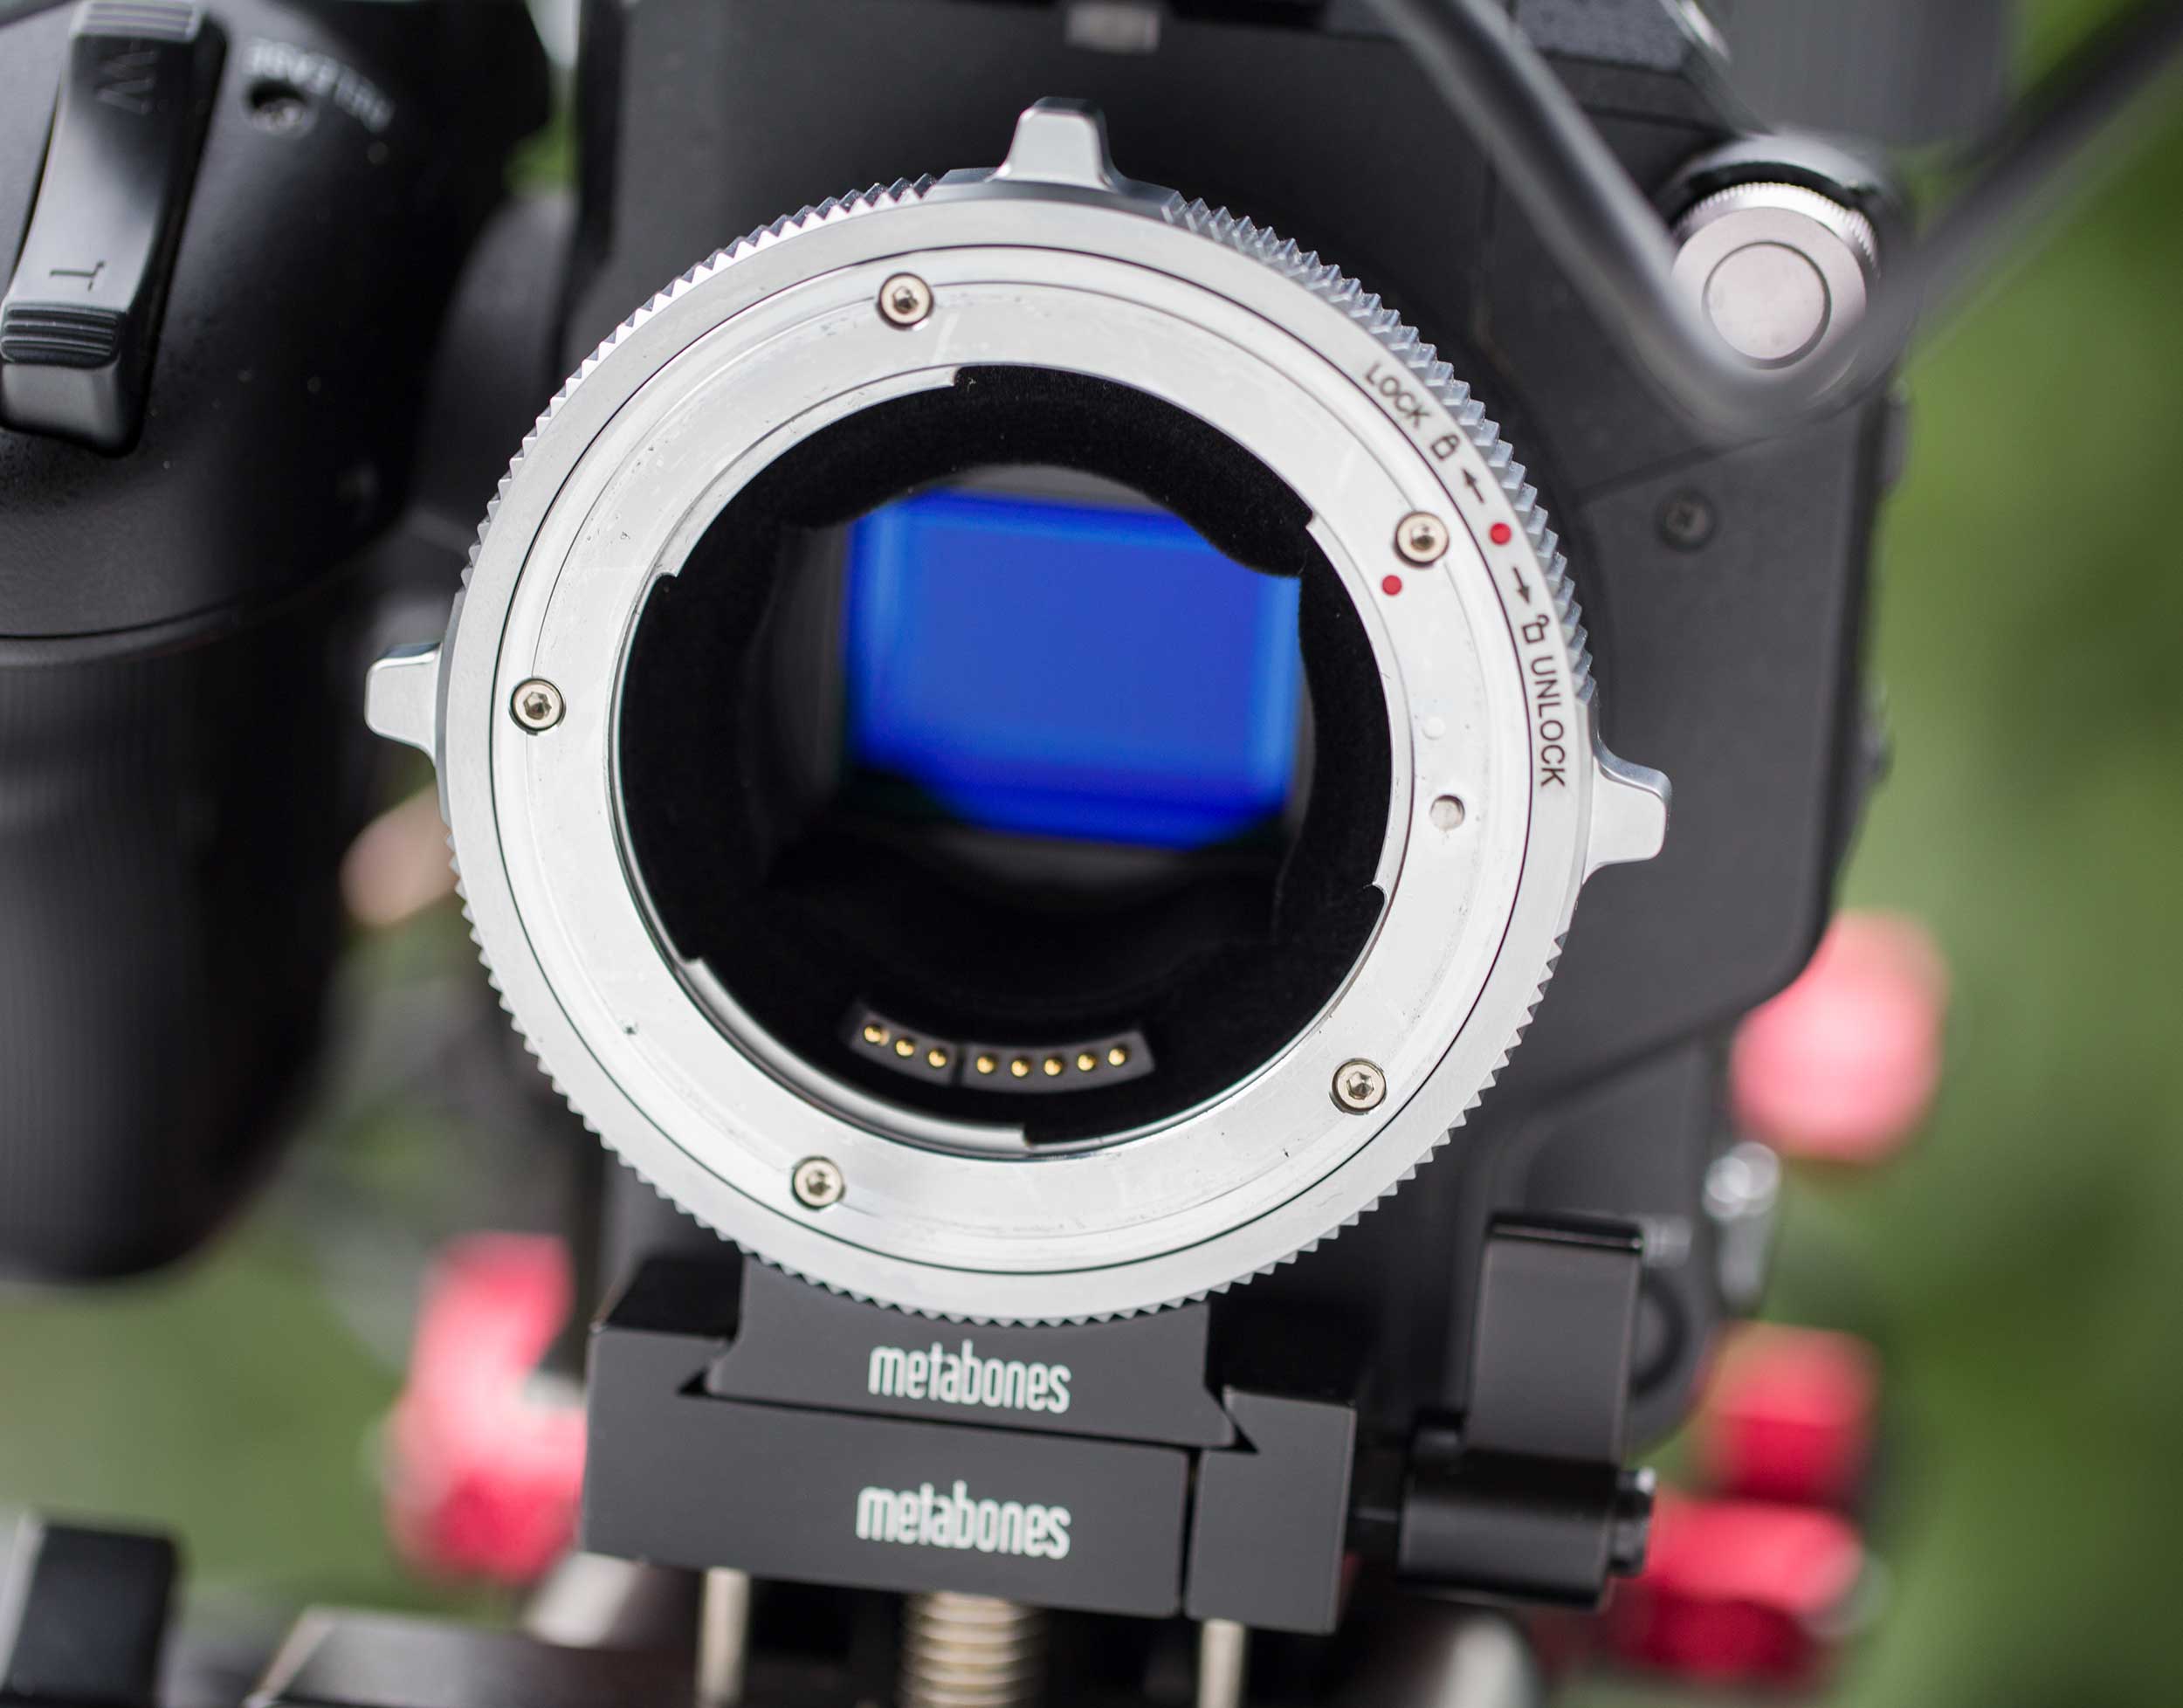 Lenses are mounted by rotating the ring around the lens, without rotating the lens